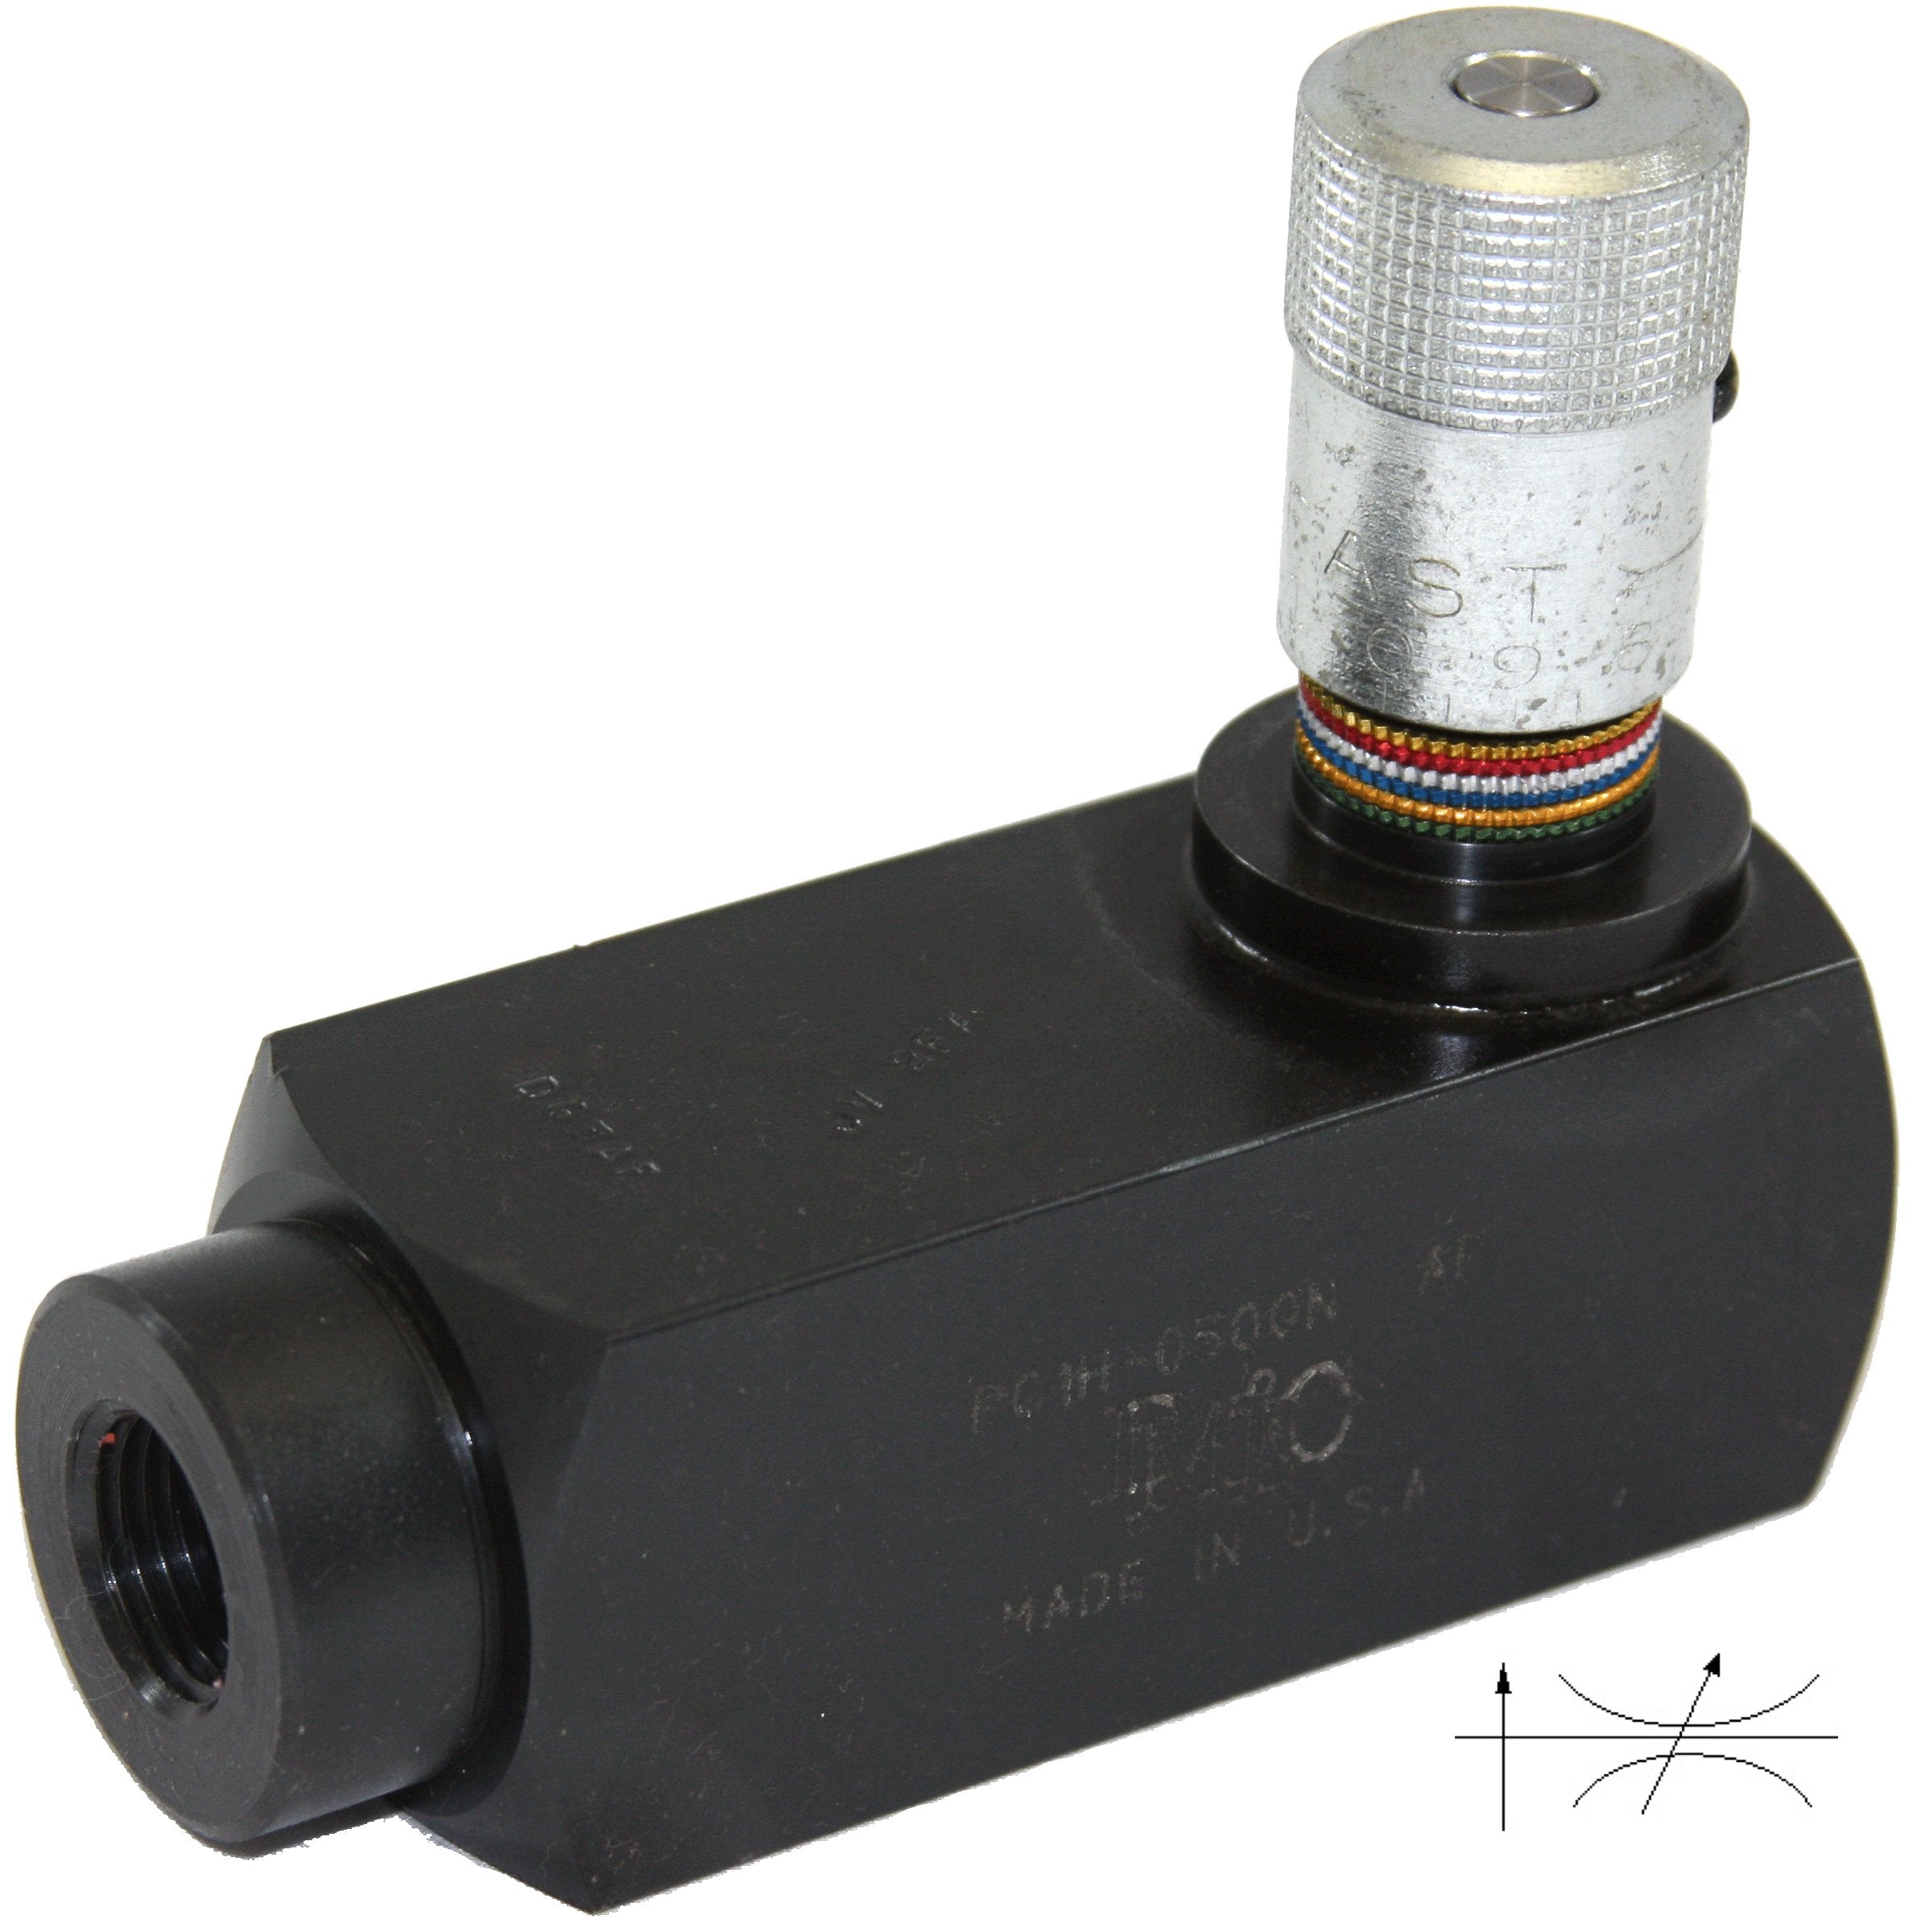 PC1H-0500S : DMIC Pressure Comp Flow Control, Unidirectional, Metered, with Check, #8 SAE (1/2"), 3000psi, Carbon Steel